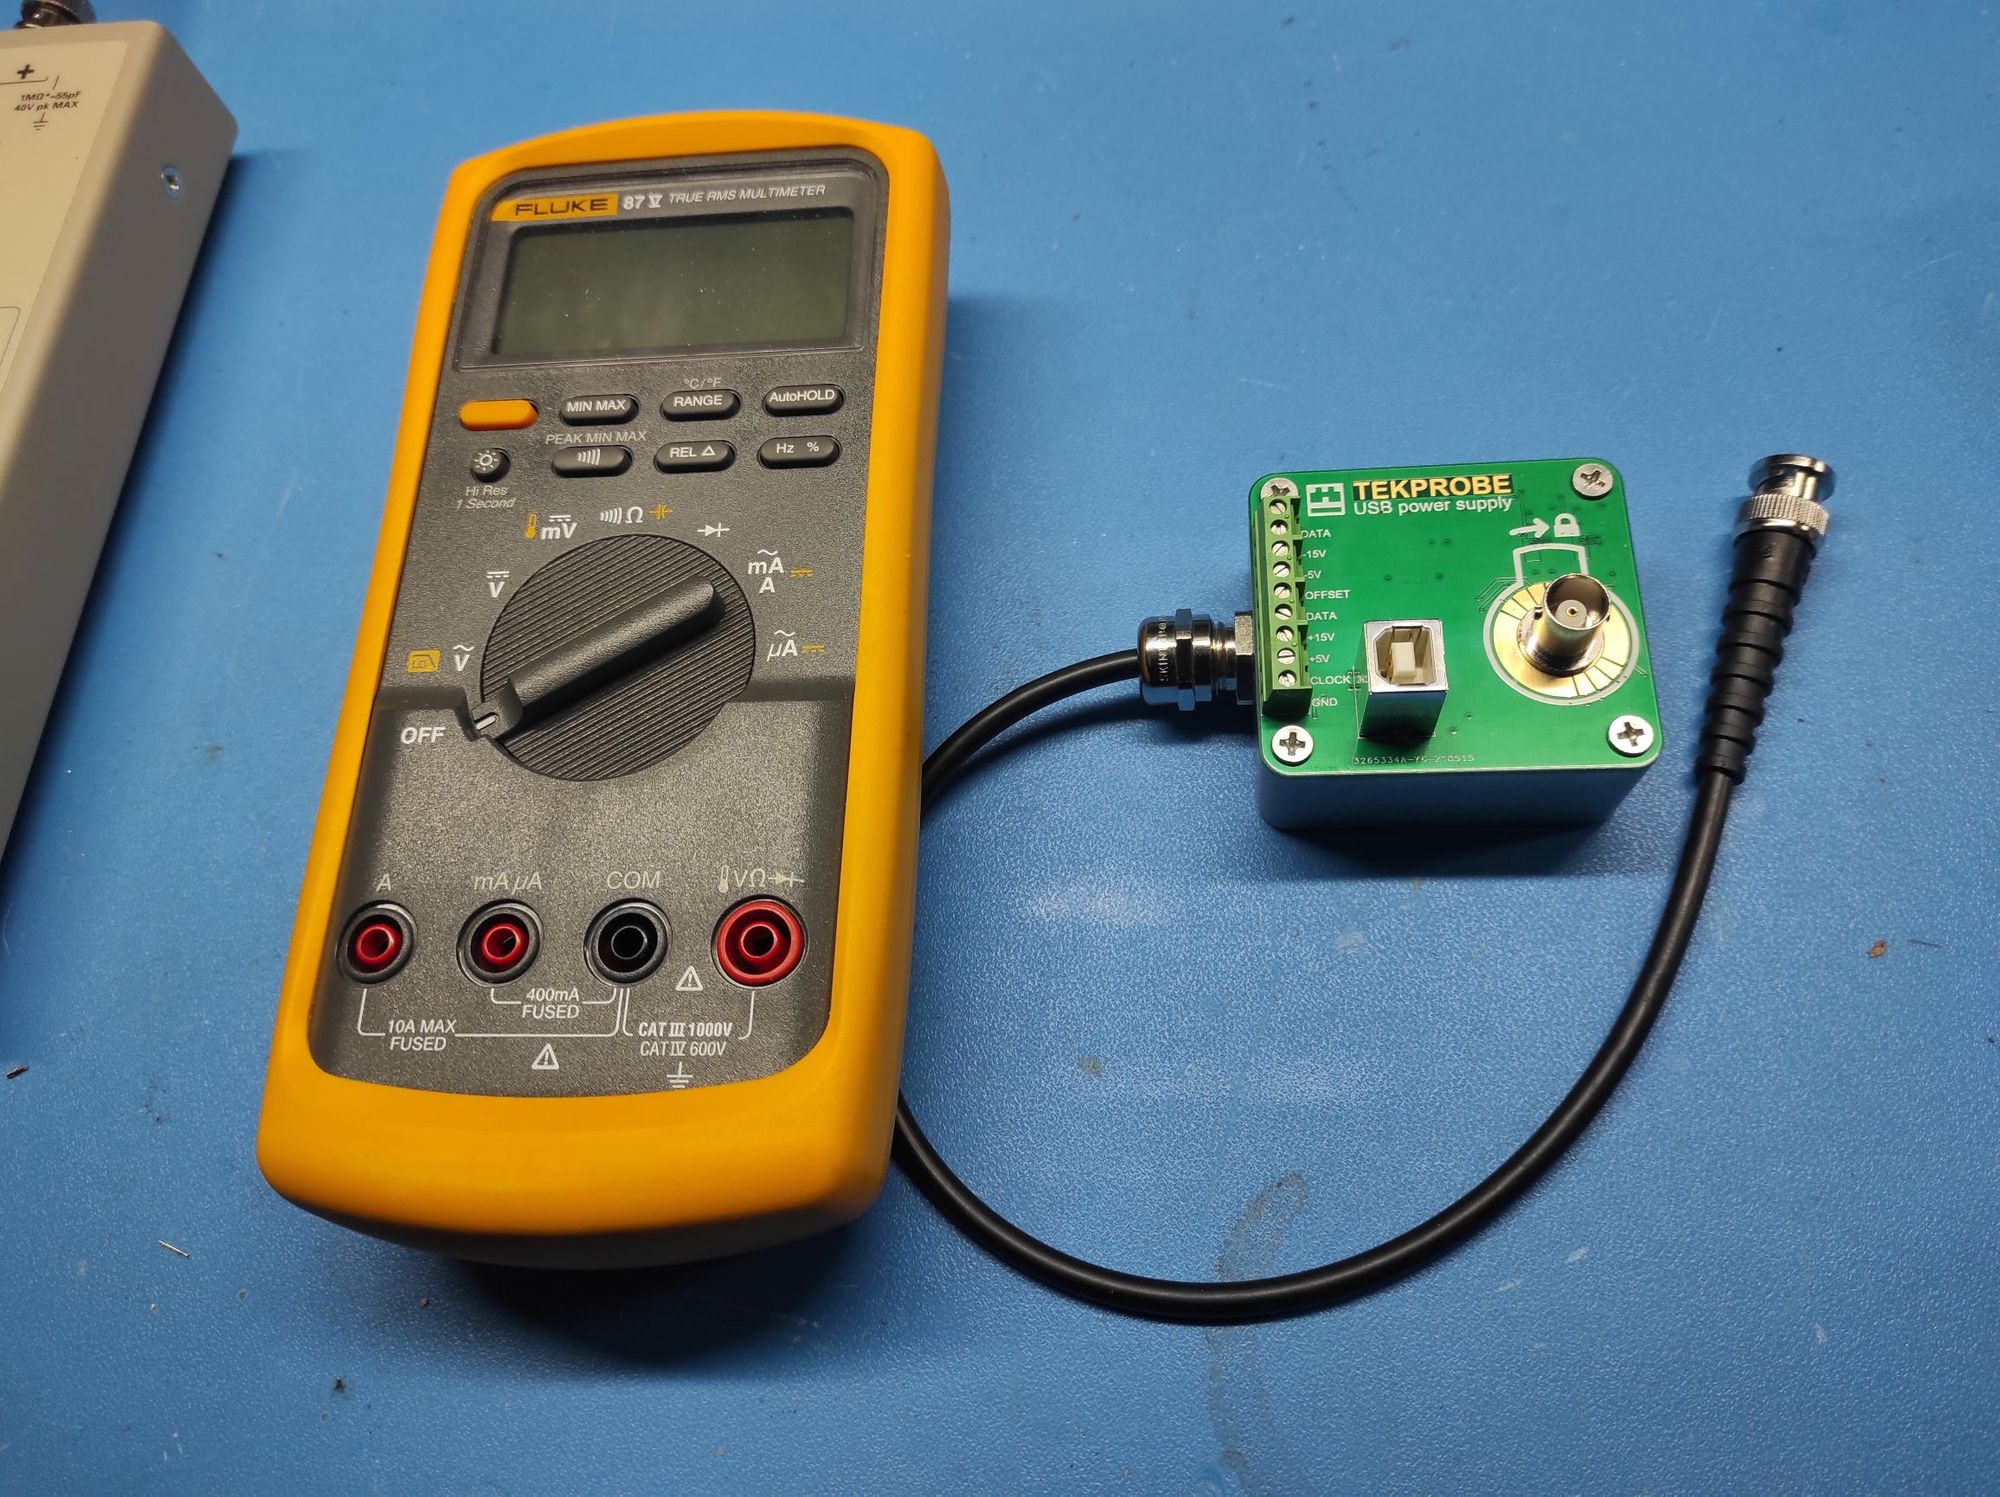 A USB power supply for the tekprobe interface